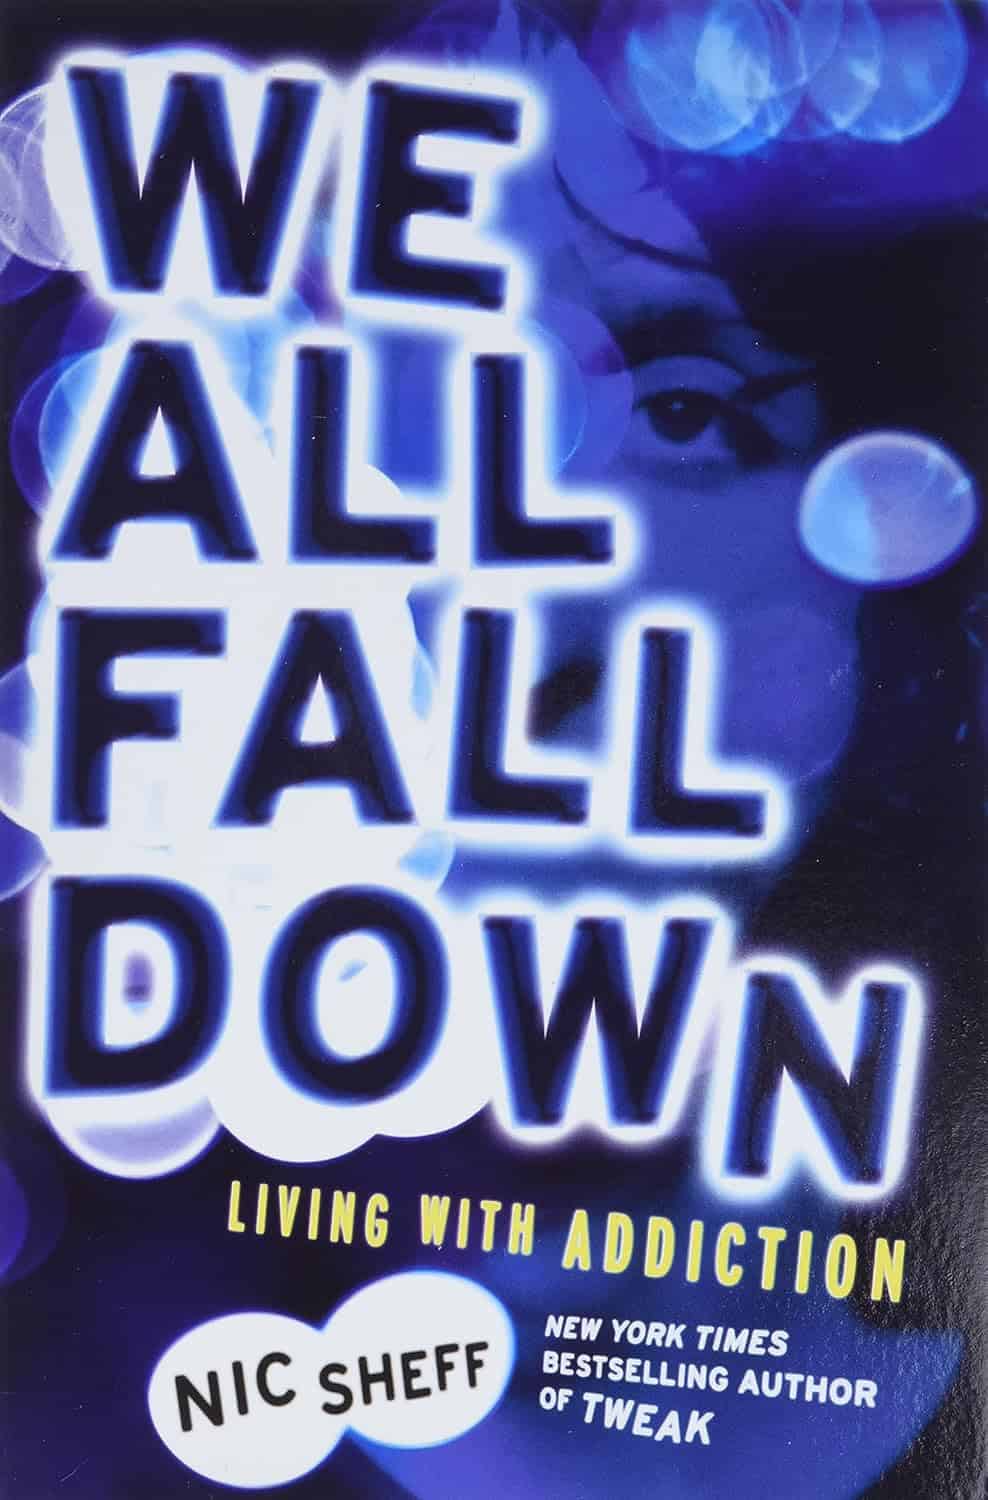 We All Fall Down by Nic Sheff